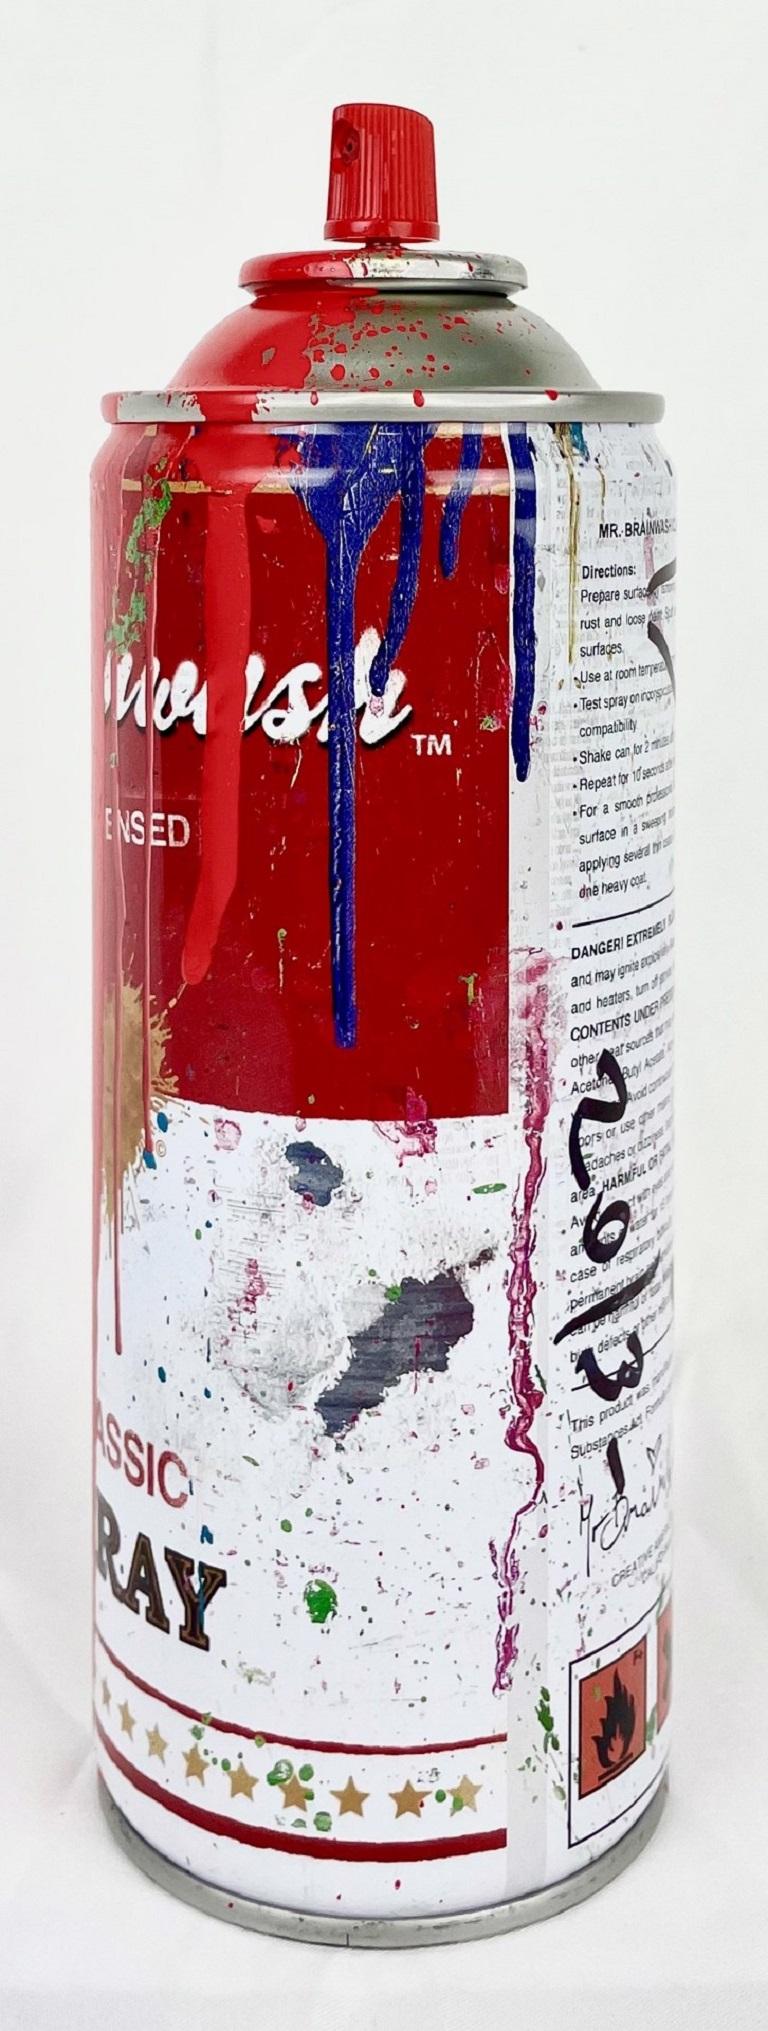 Campbells Soup Hand-Finished Spray Can - Contemporary Sculpture by Mr. Brainwash